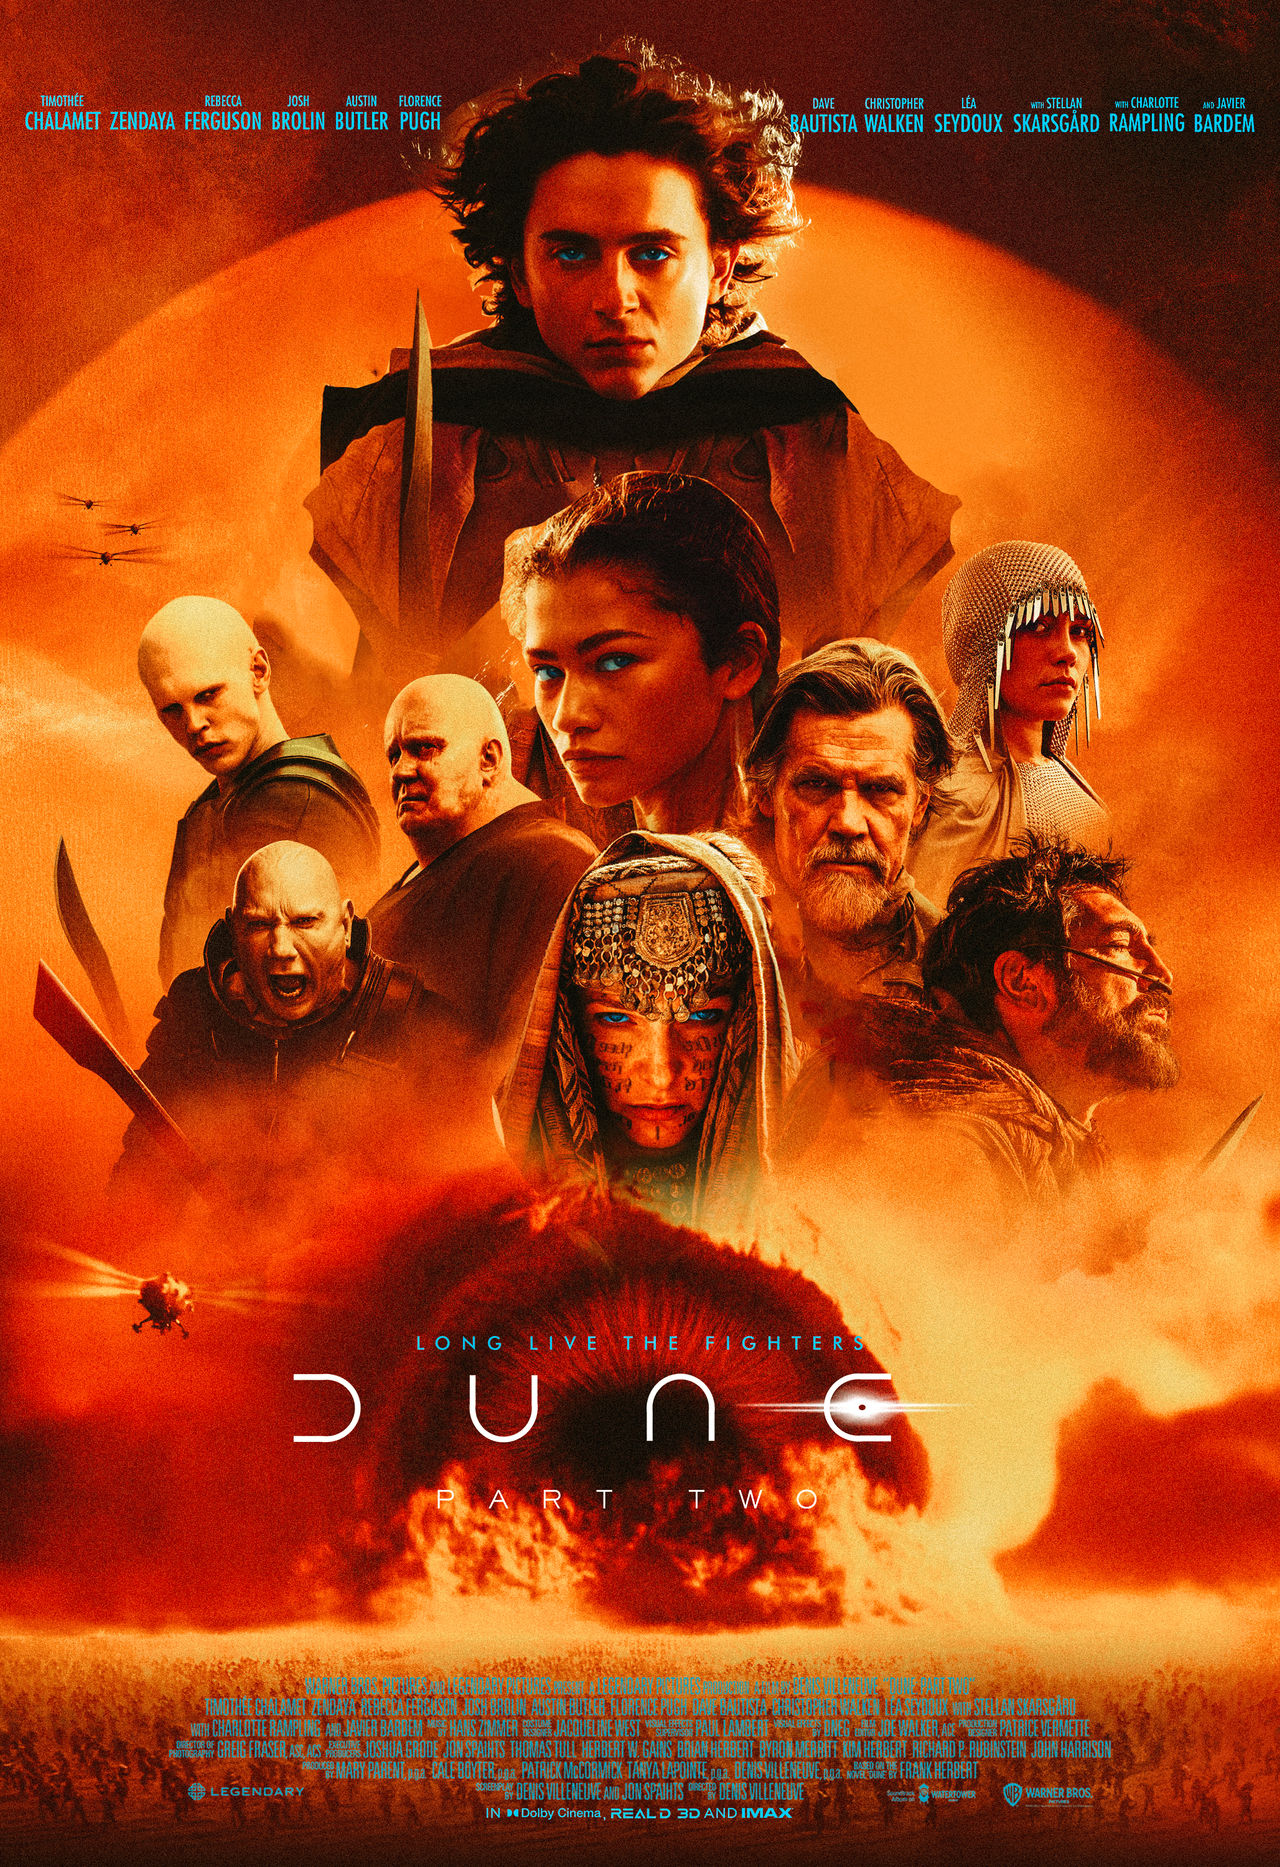 The cinema poster for Dune: Part Two